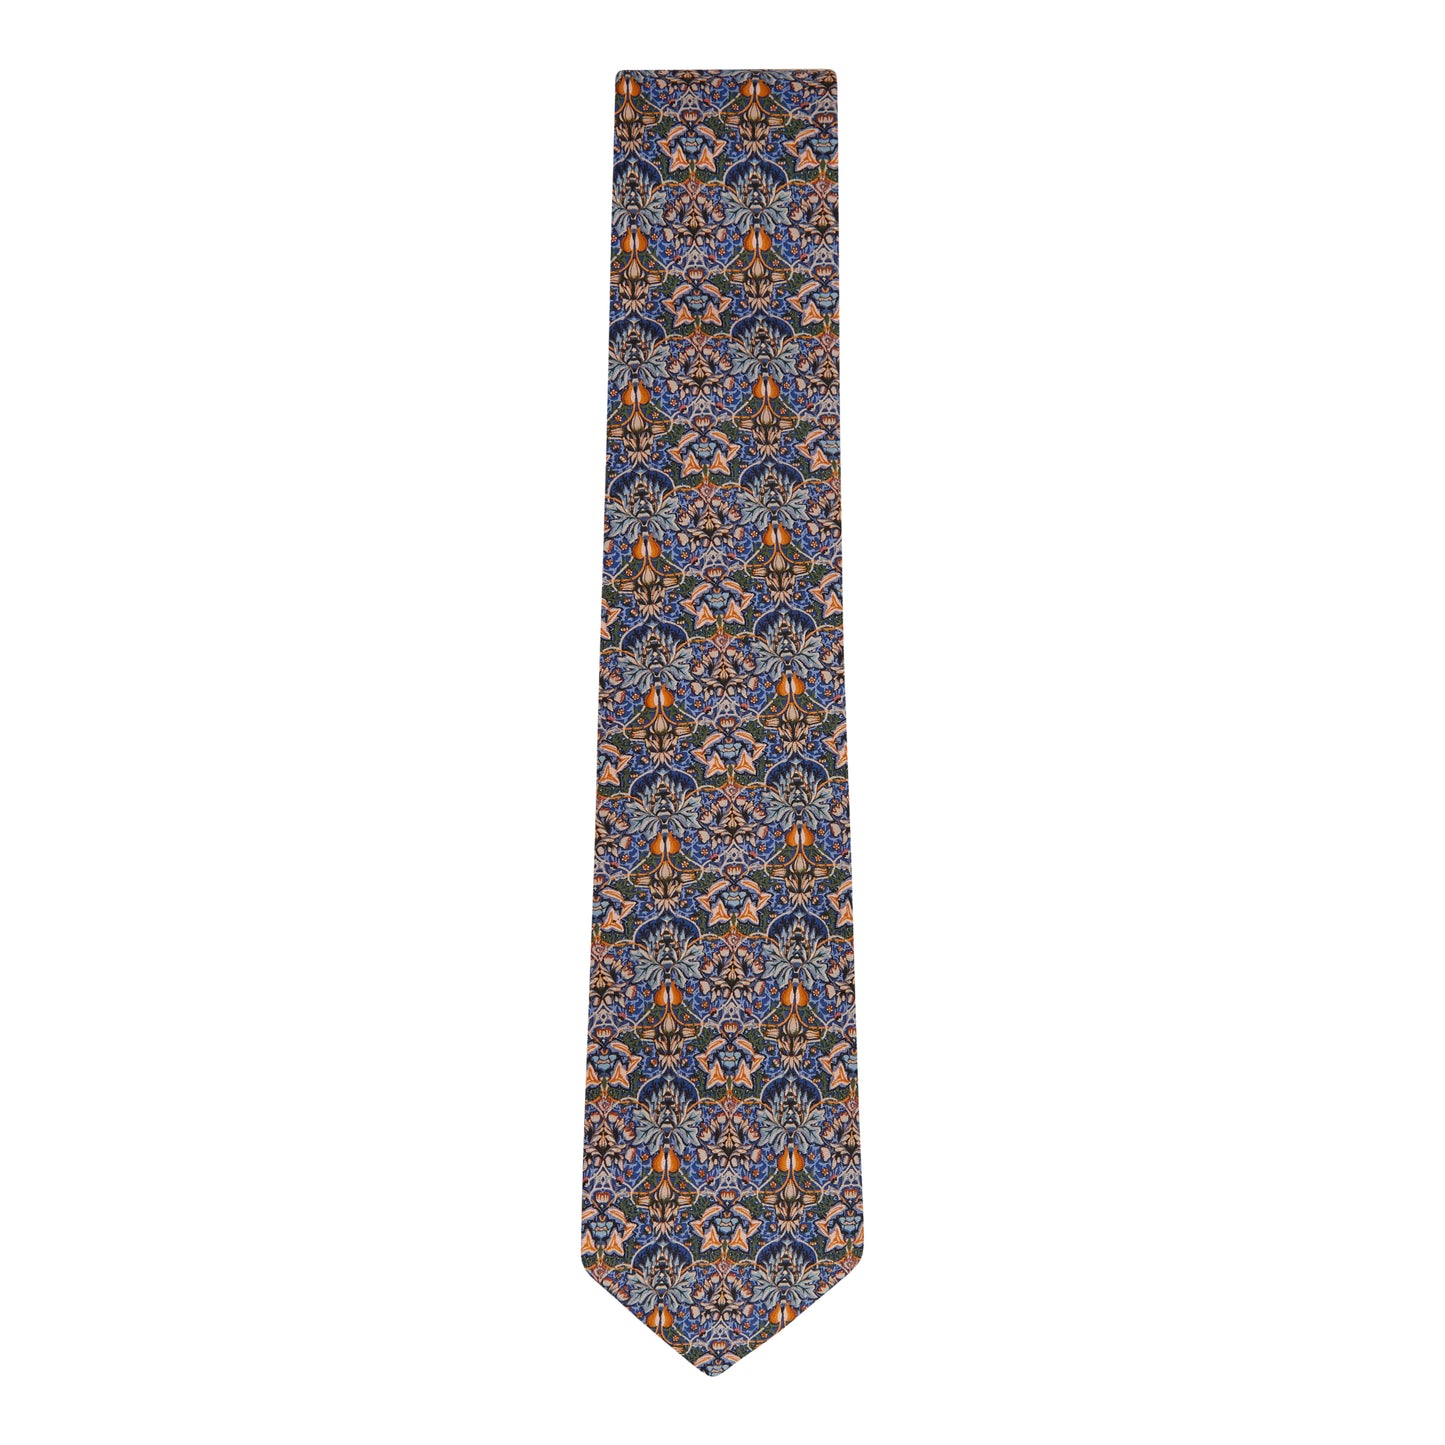 Silk tie with artichoke design by William Morris. From the collection of The Fitzwilliam Museum.